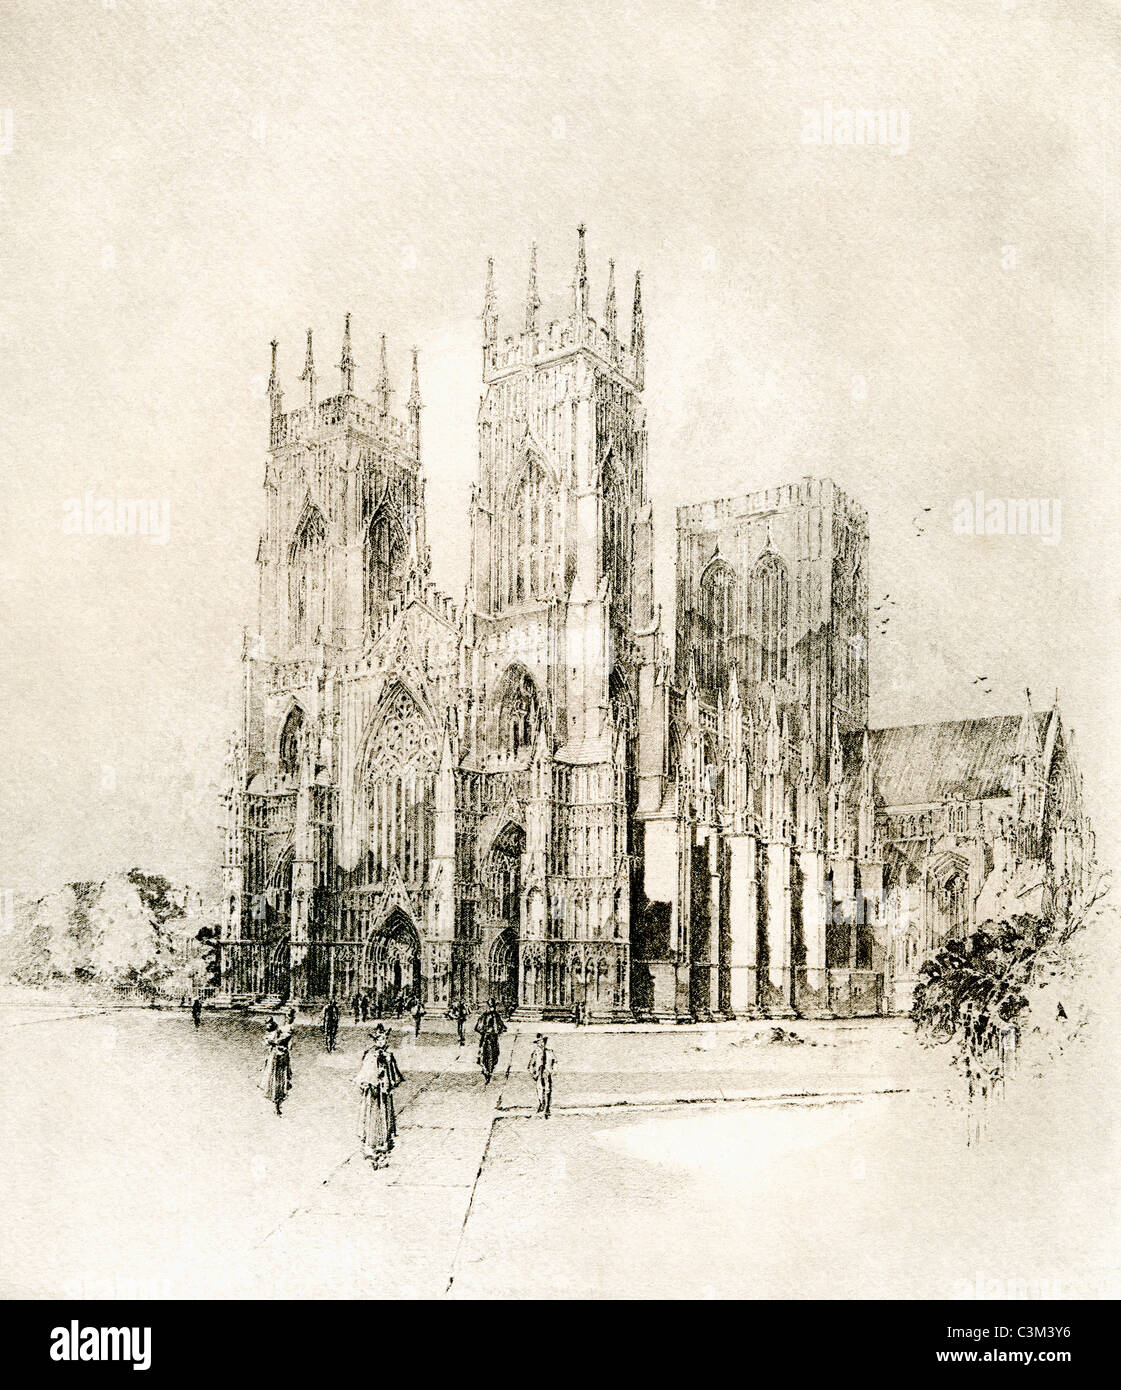 York Minster, York, England. West Front in late 19th century. Stock Photo